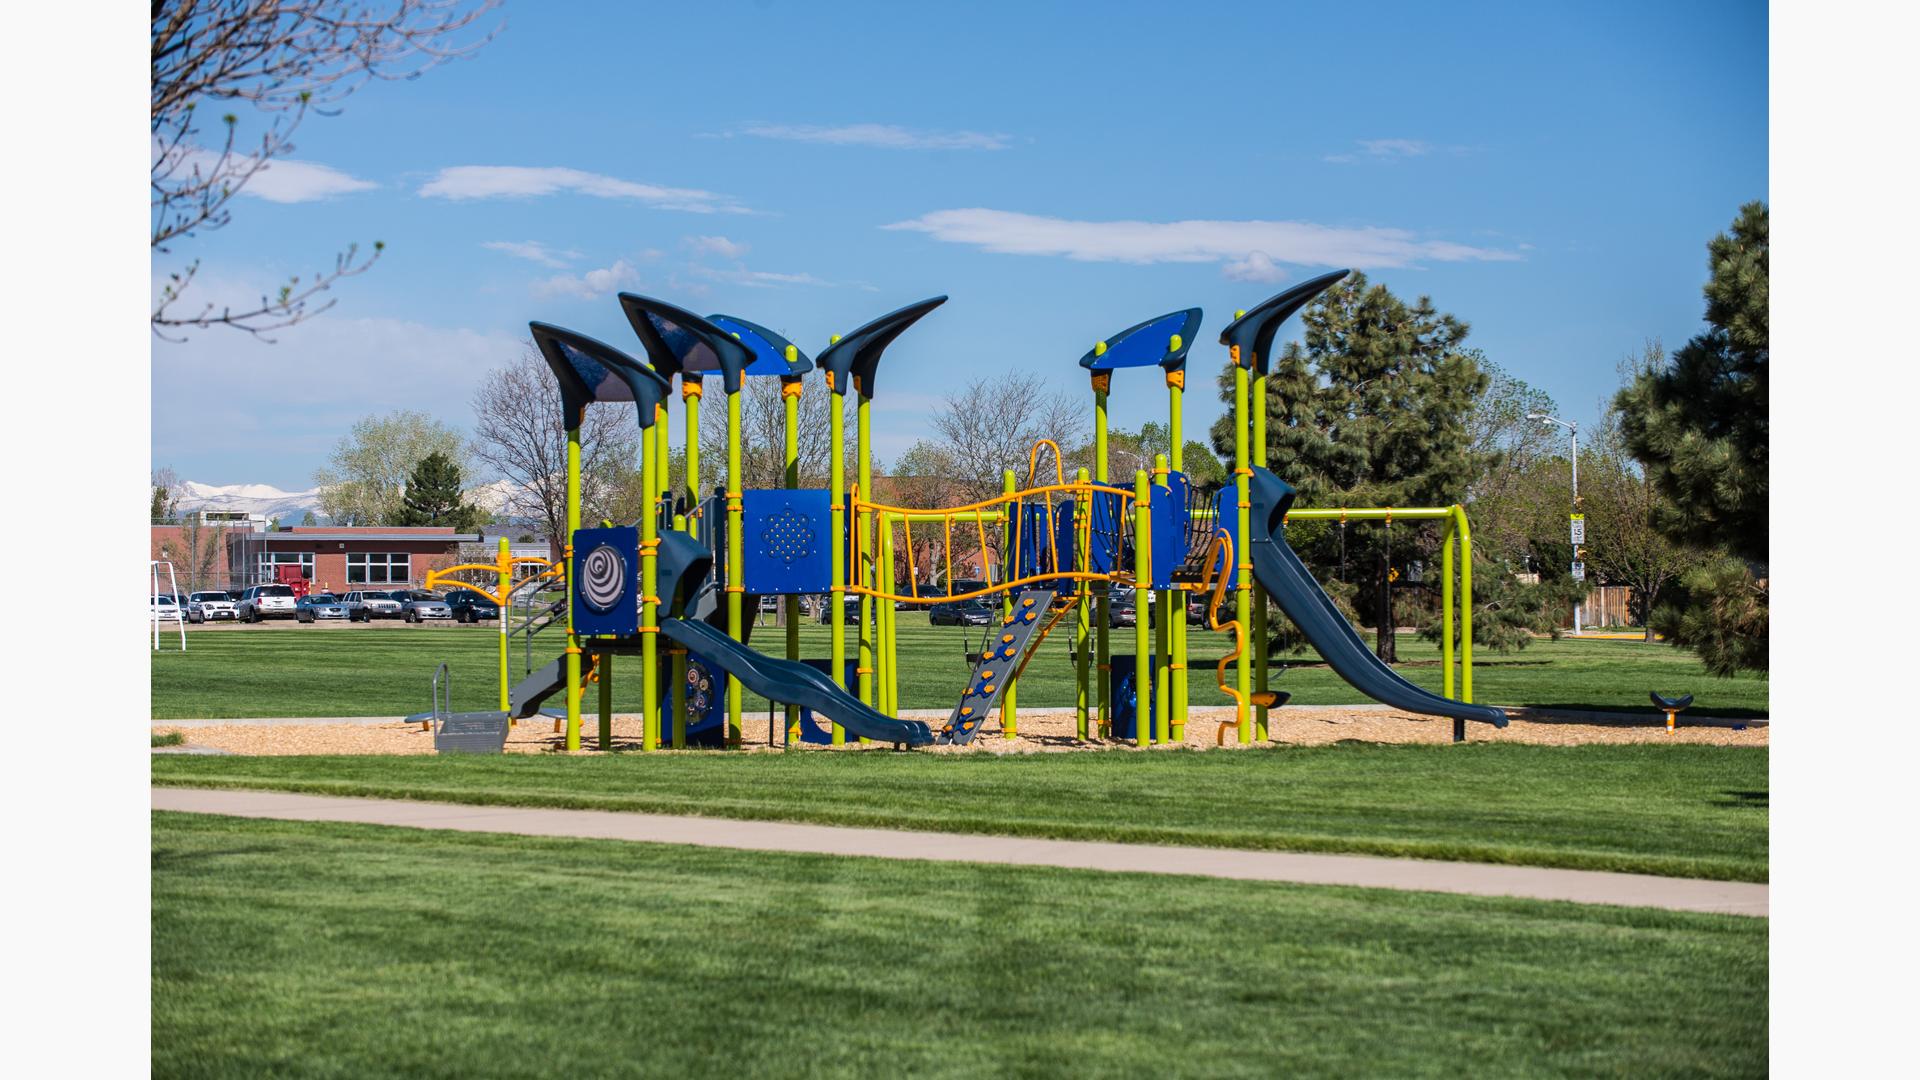 A playground with lime green posts and blue accents on the other playground activities set next to a school and it's parking lot. 